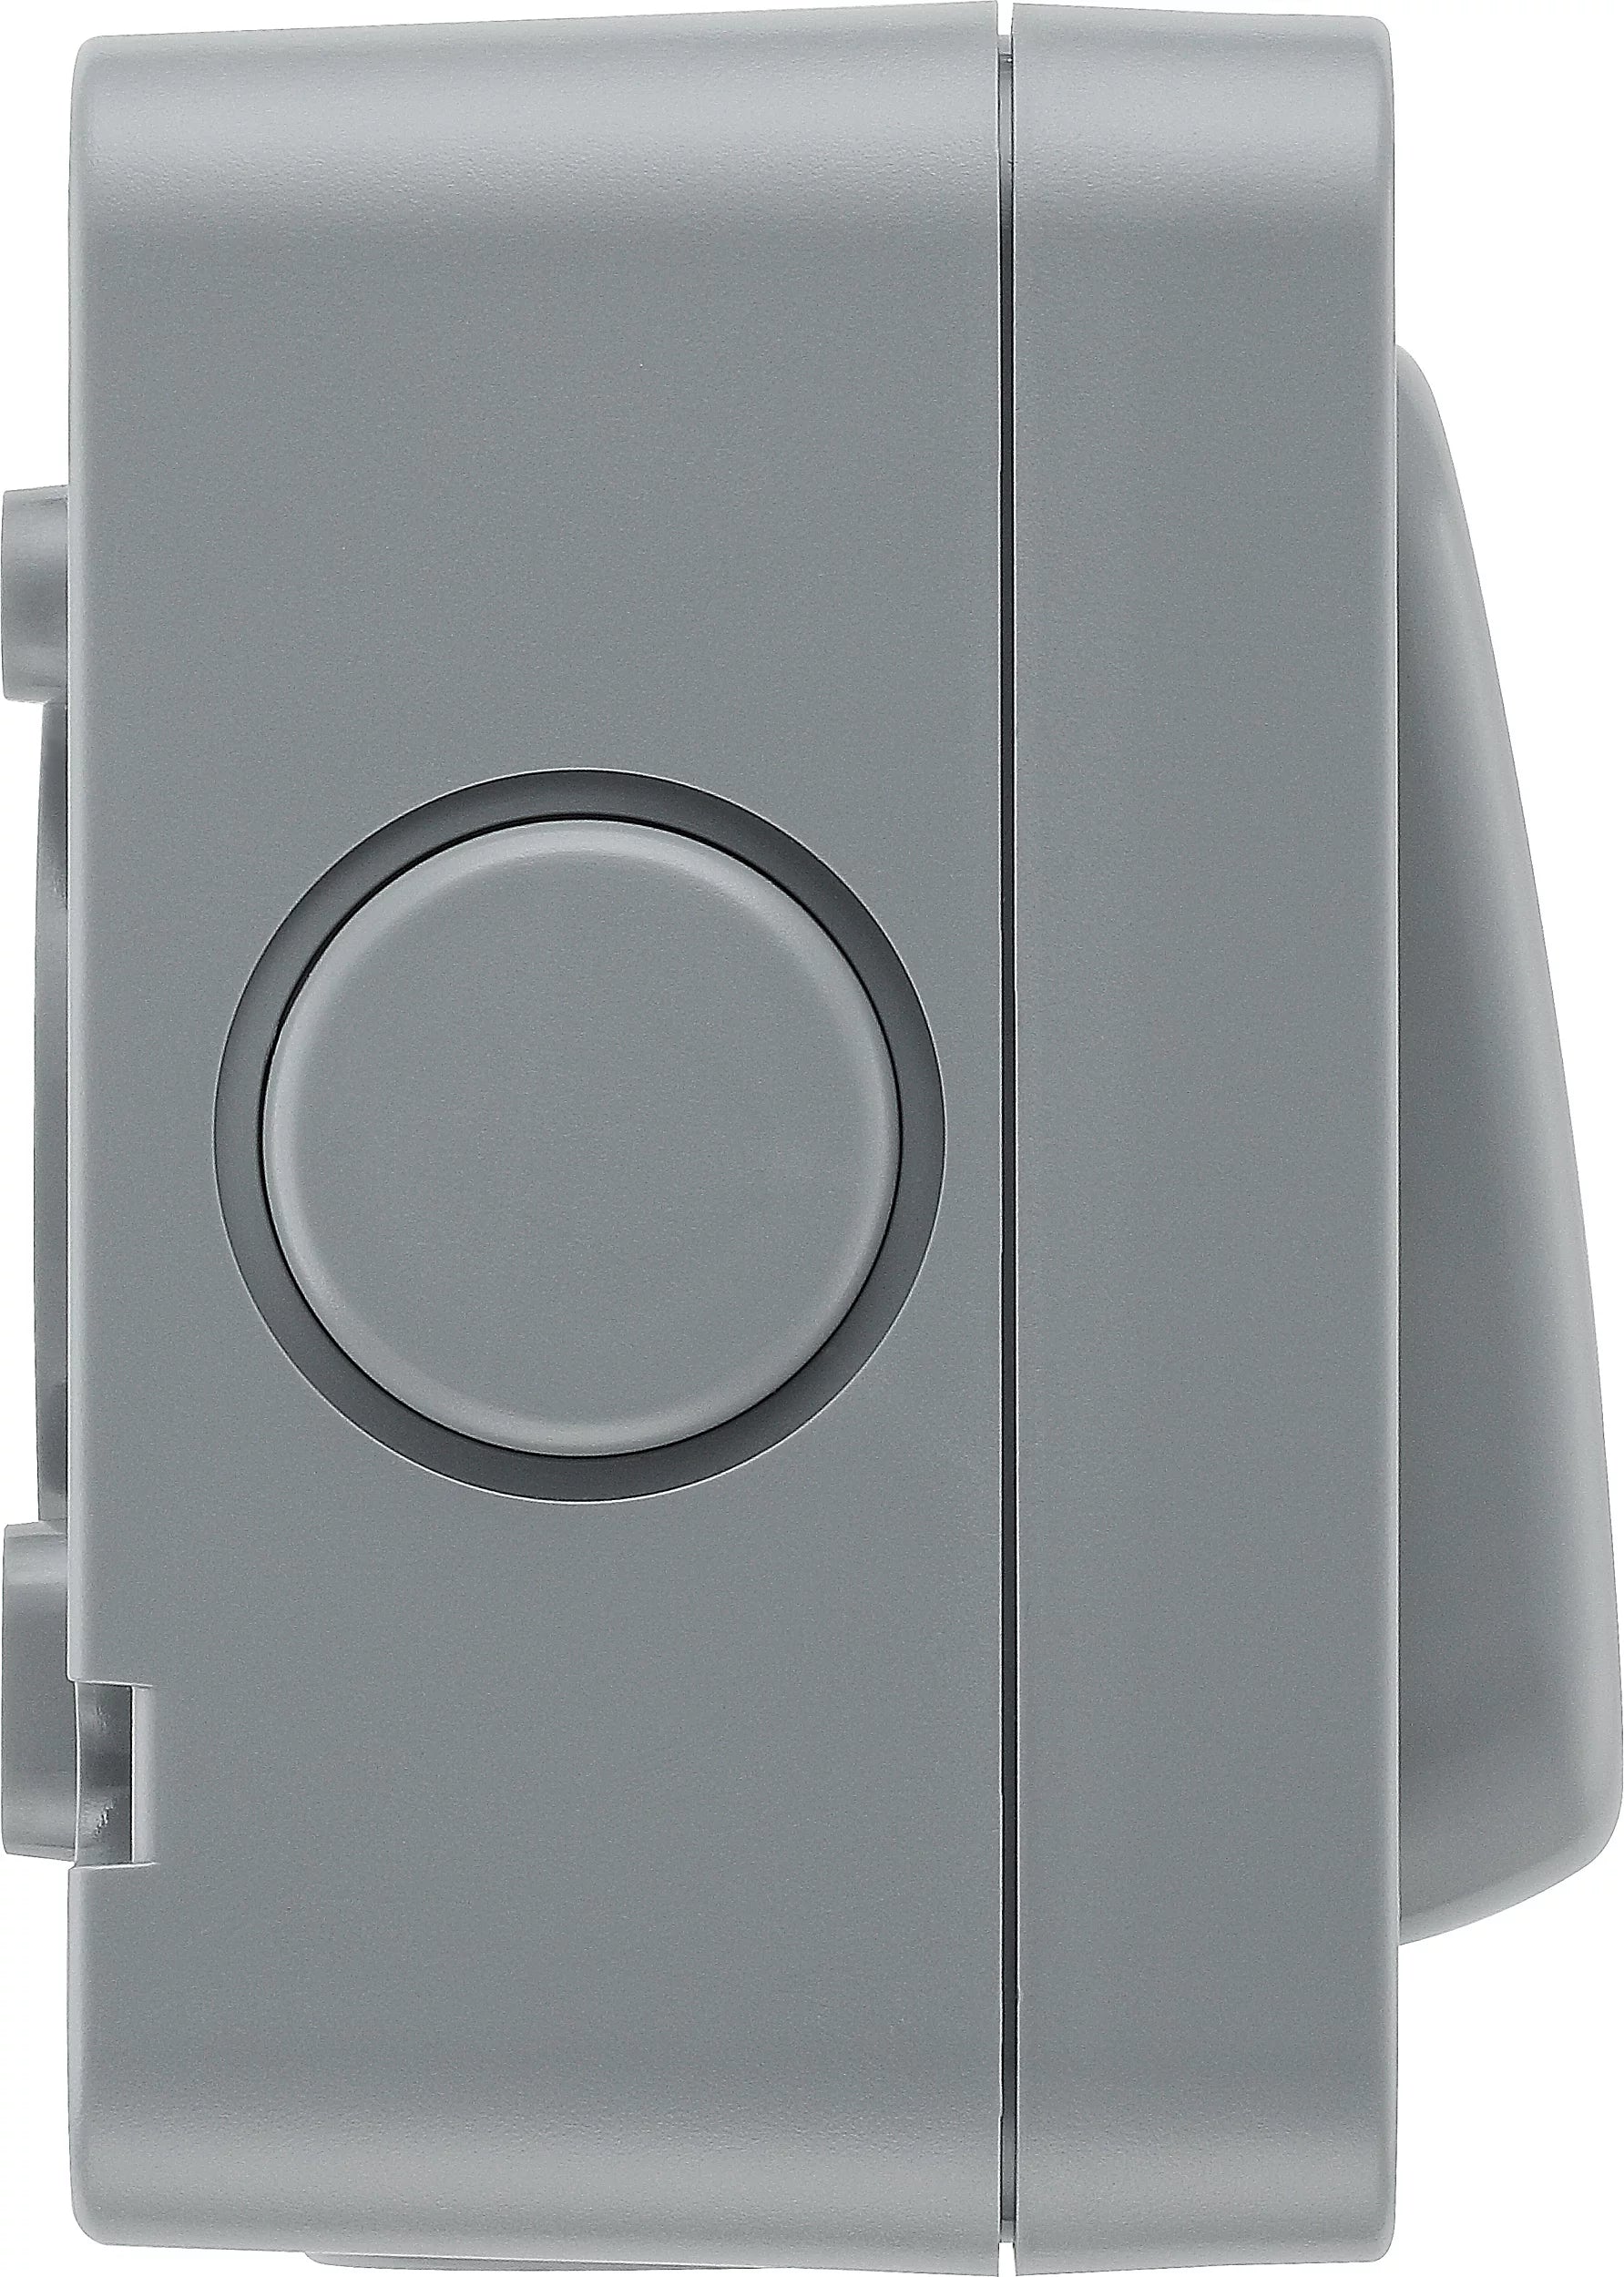 BG 20A Grey 1 gang Outdoor Weatherproof switch with LED indicator 2132